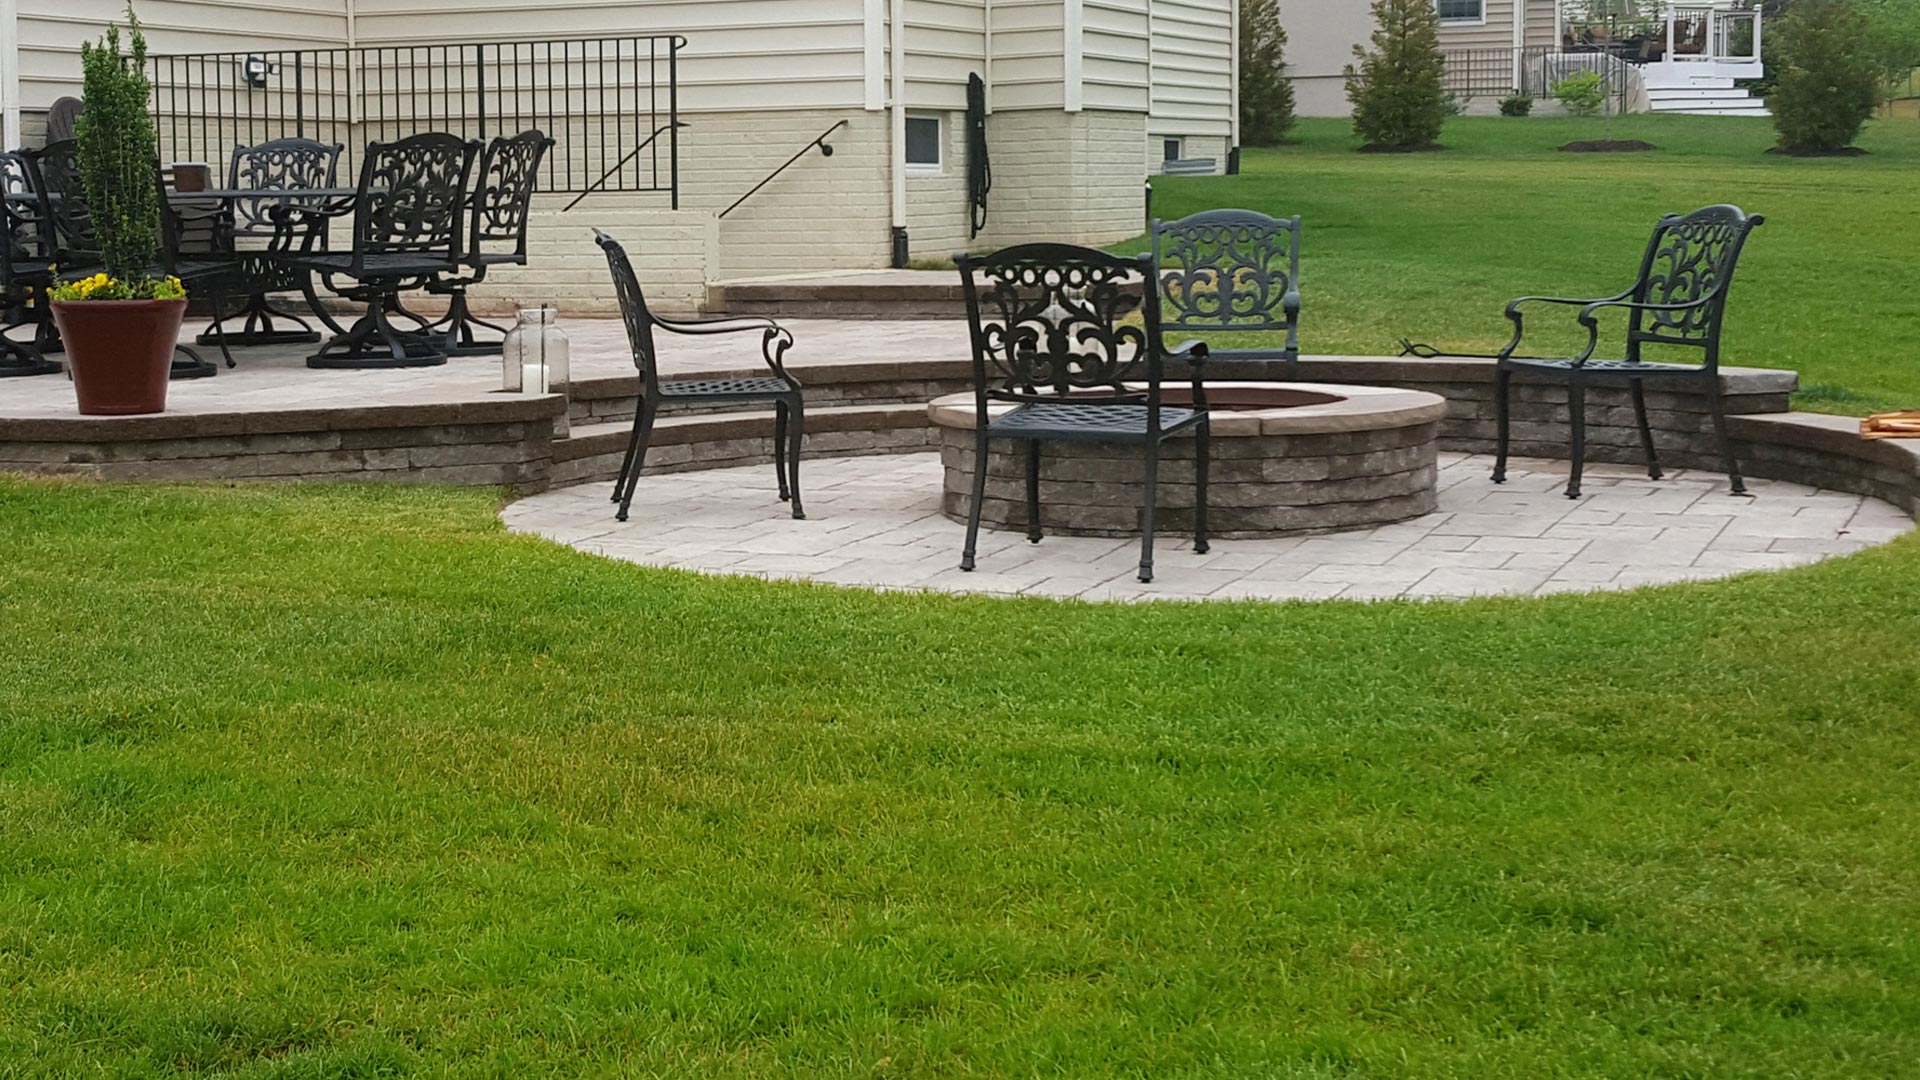 A new fire pit, paver patio, and a seating wall designed and built at a home in Haymarket.